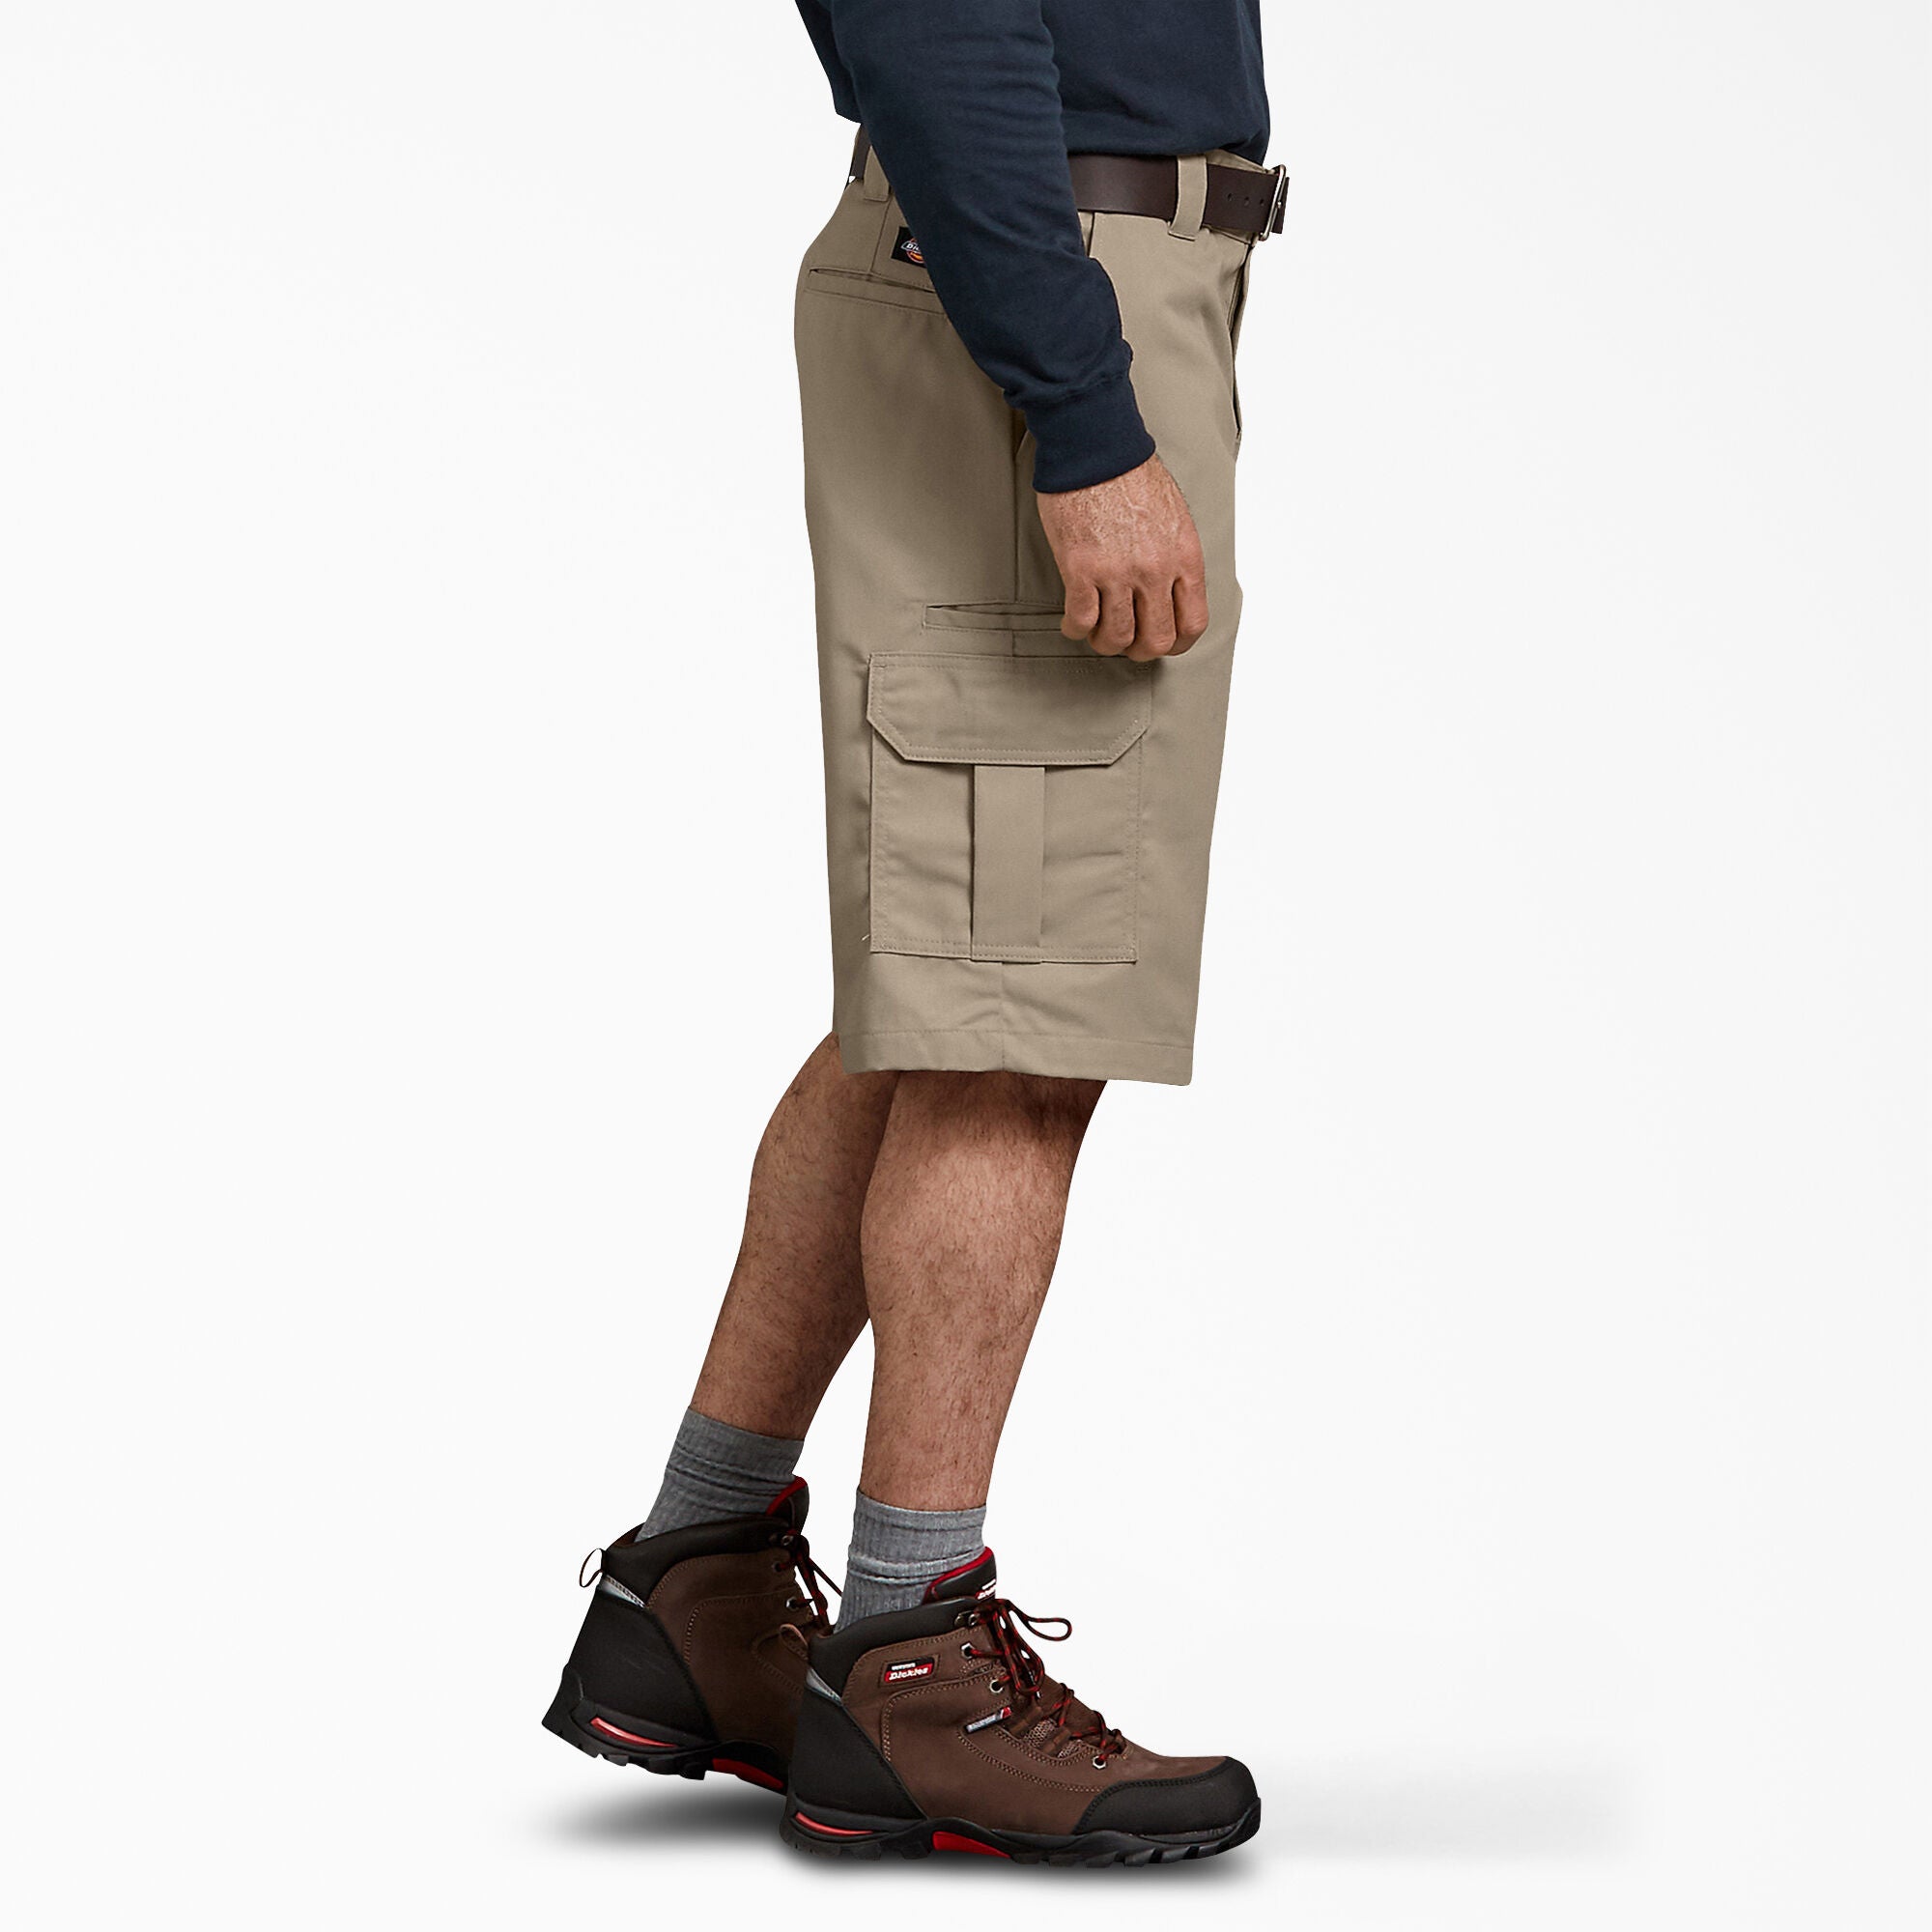 Dickies Relaxed Fit Cargo Shorts, 13", Desert Sand